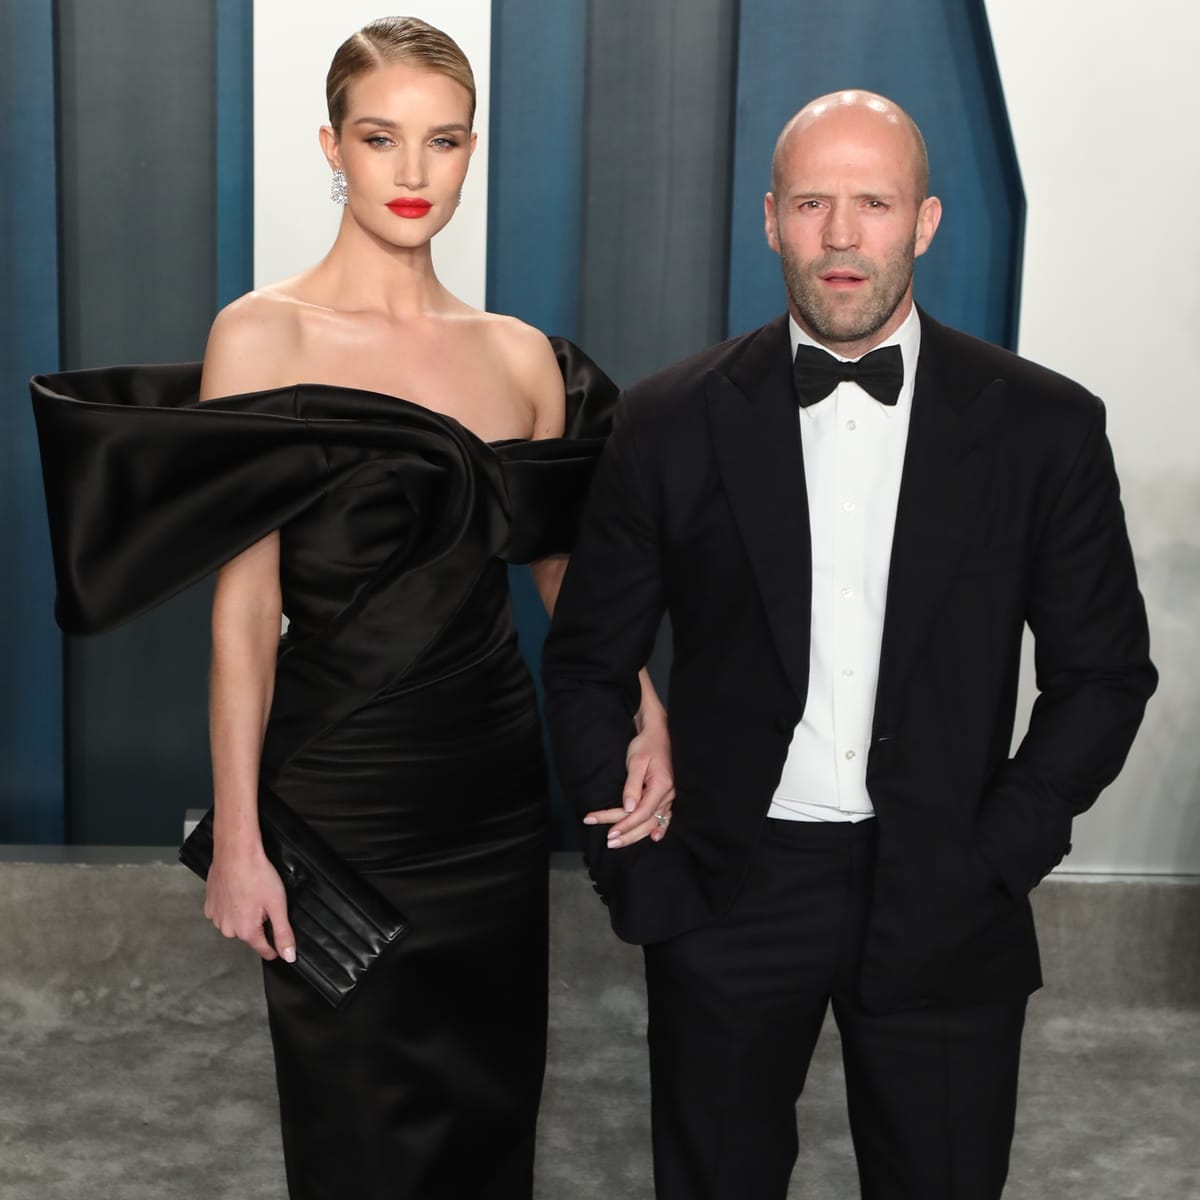 In a relationship since 2010 and engaged since 2016, Rosie Huntington Whiteley and Jason Statham announced their second pregnancy on August 20, 2021